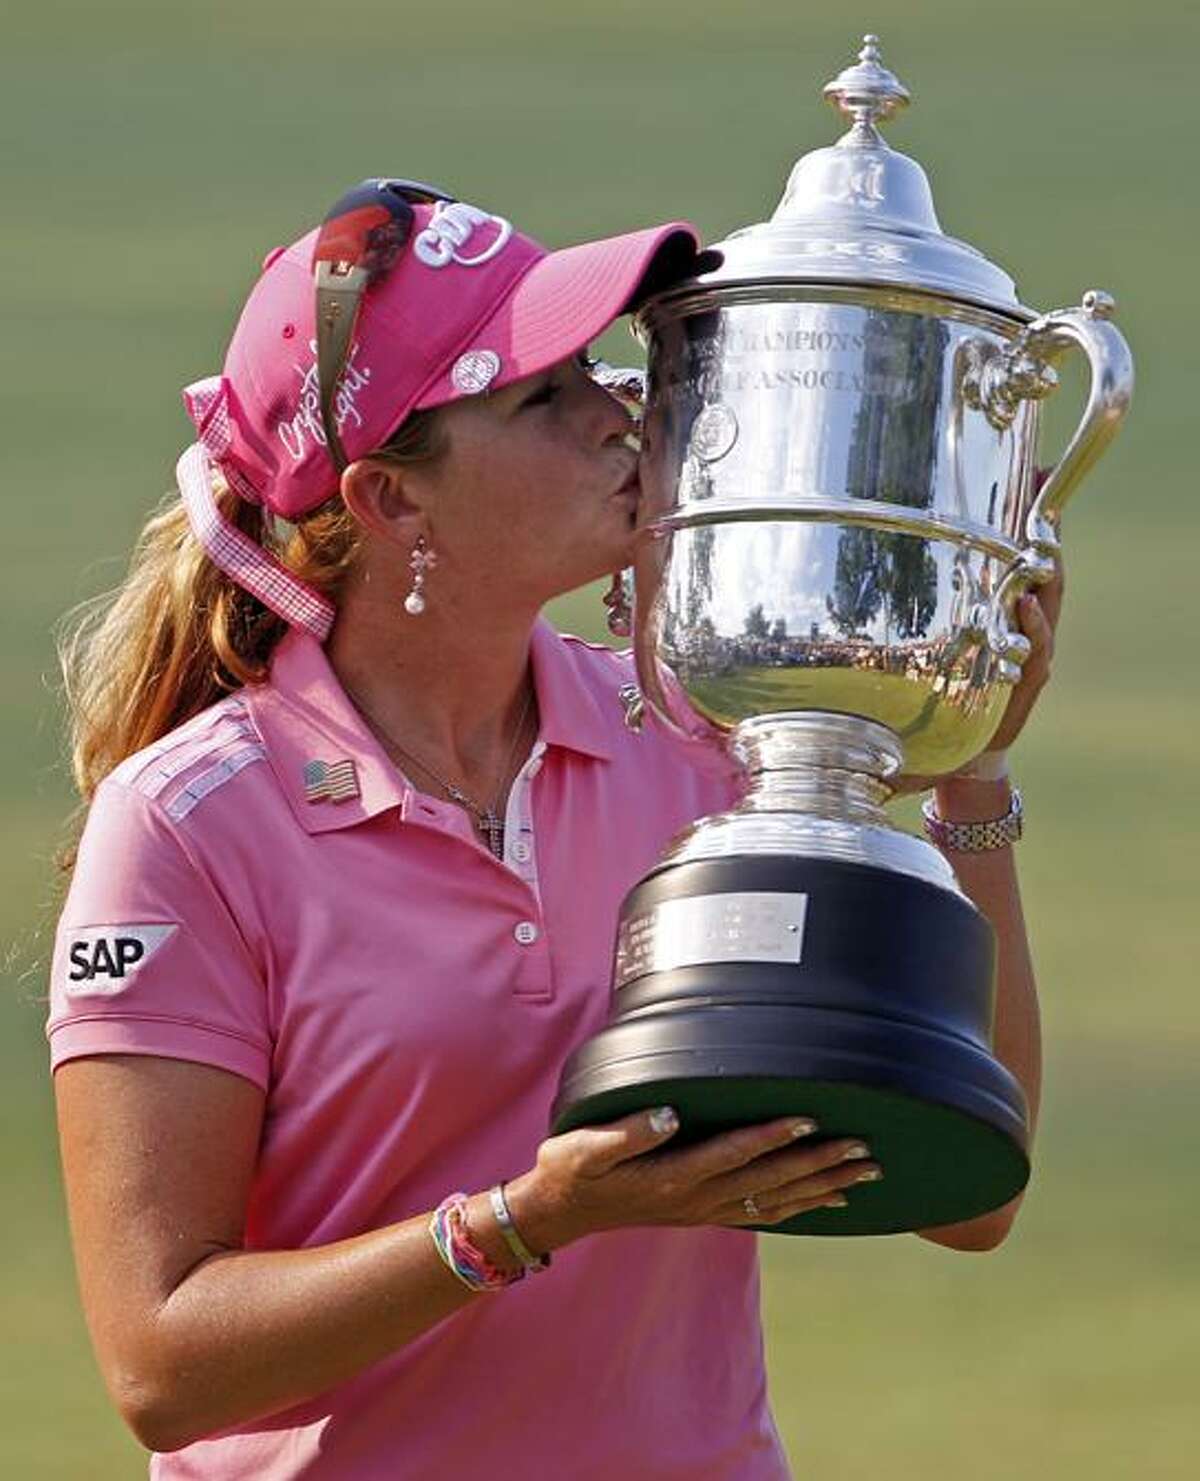 Paula Creamer kisses the trophy after winning the U.S. Women's Open golf tournament at Oakmont Country Club in Oakmont, Pa., Sunday. Creamer has won her first major after a final-round, 2-under 69 gave her a 3-under 281 for the tournament. (AP Photo/Gene J. Puskar)